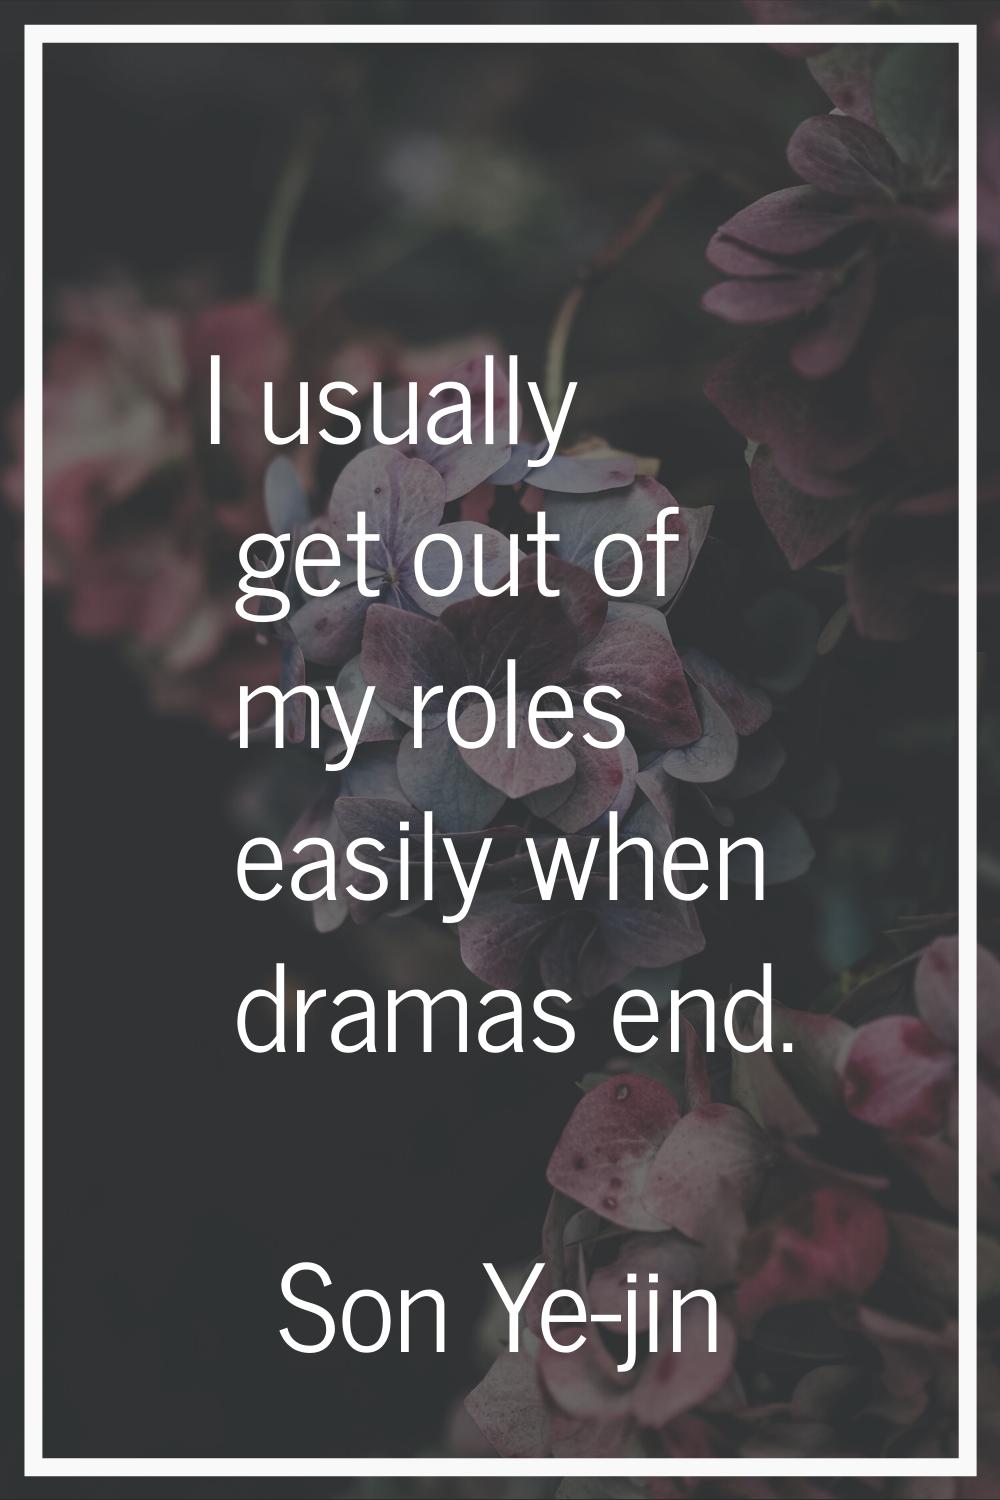 I usually get out of my roles easily when dramas end.